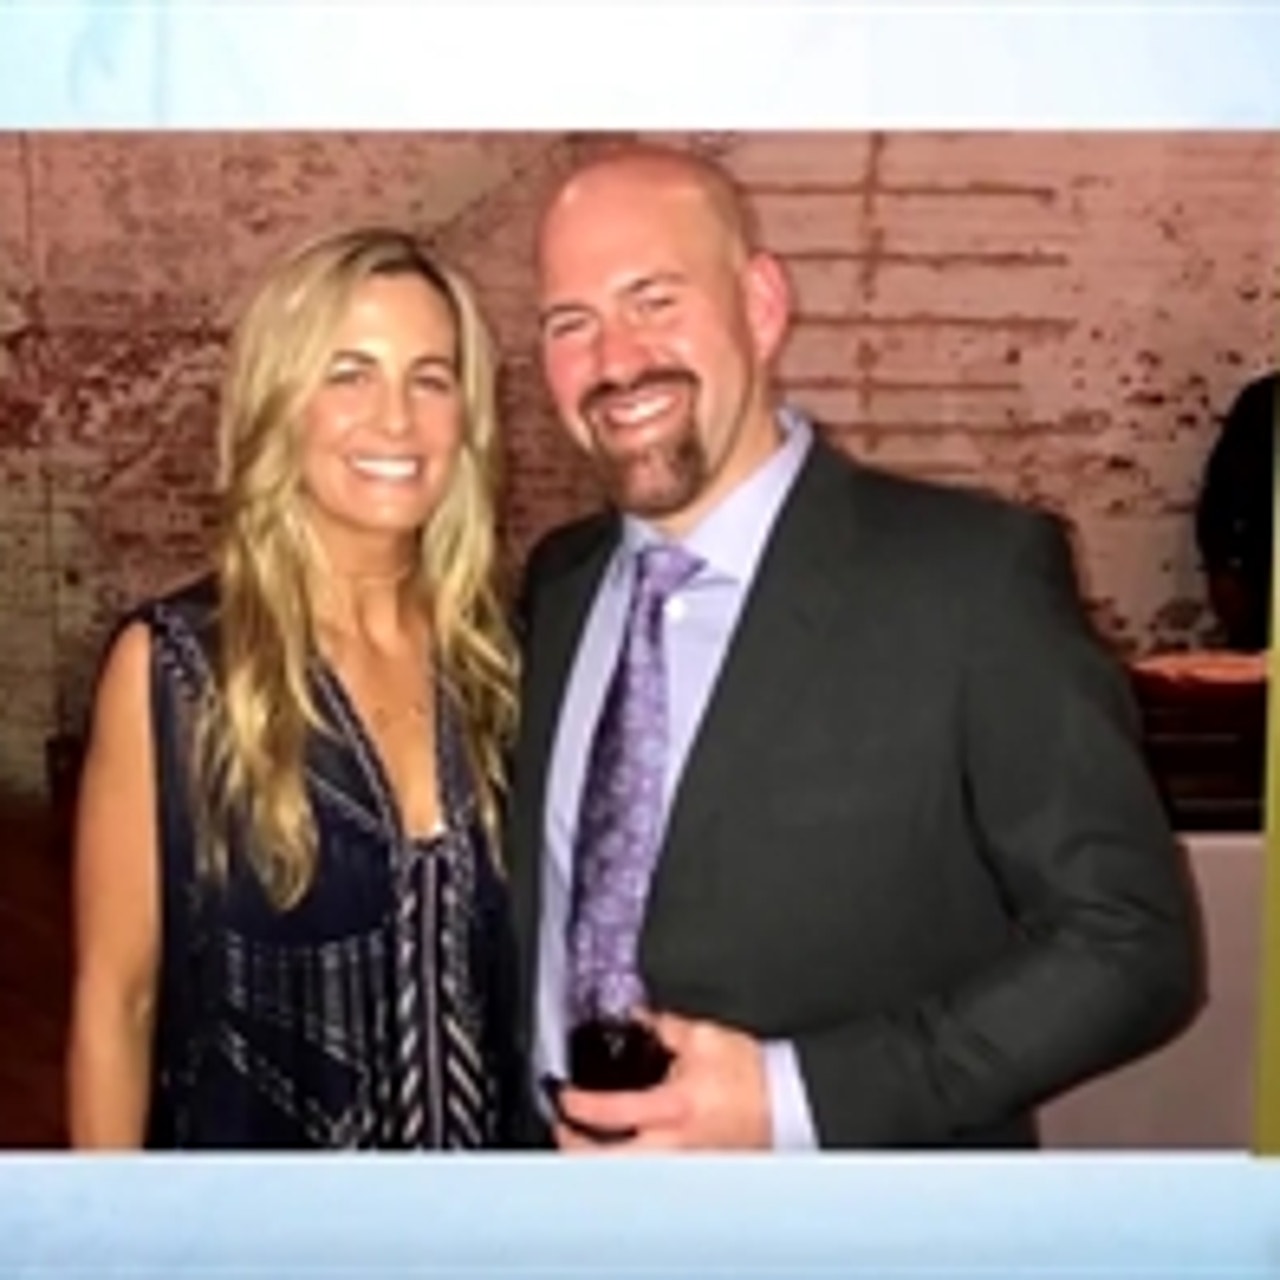 Kevin Youkilis on the best part of being married to Julie Brady